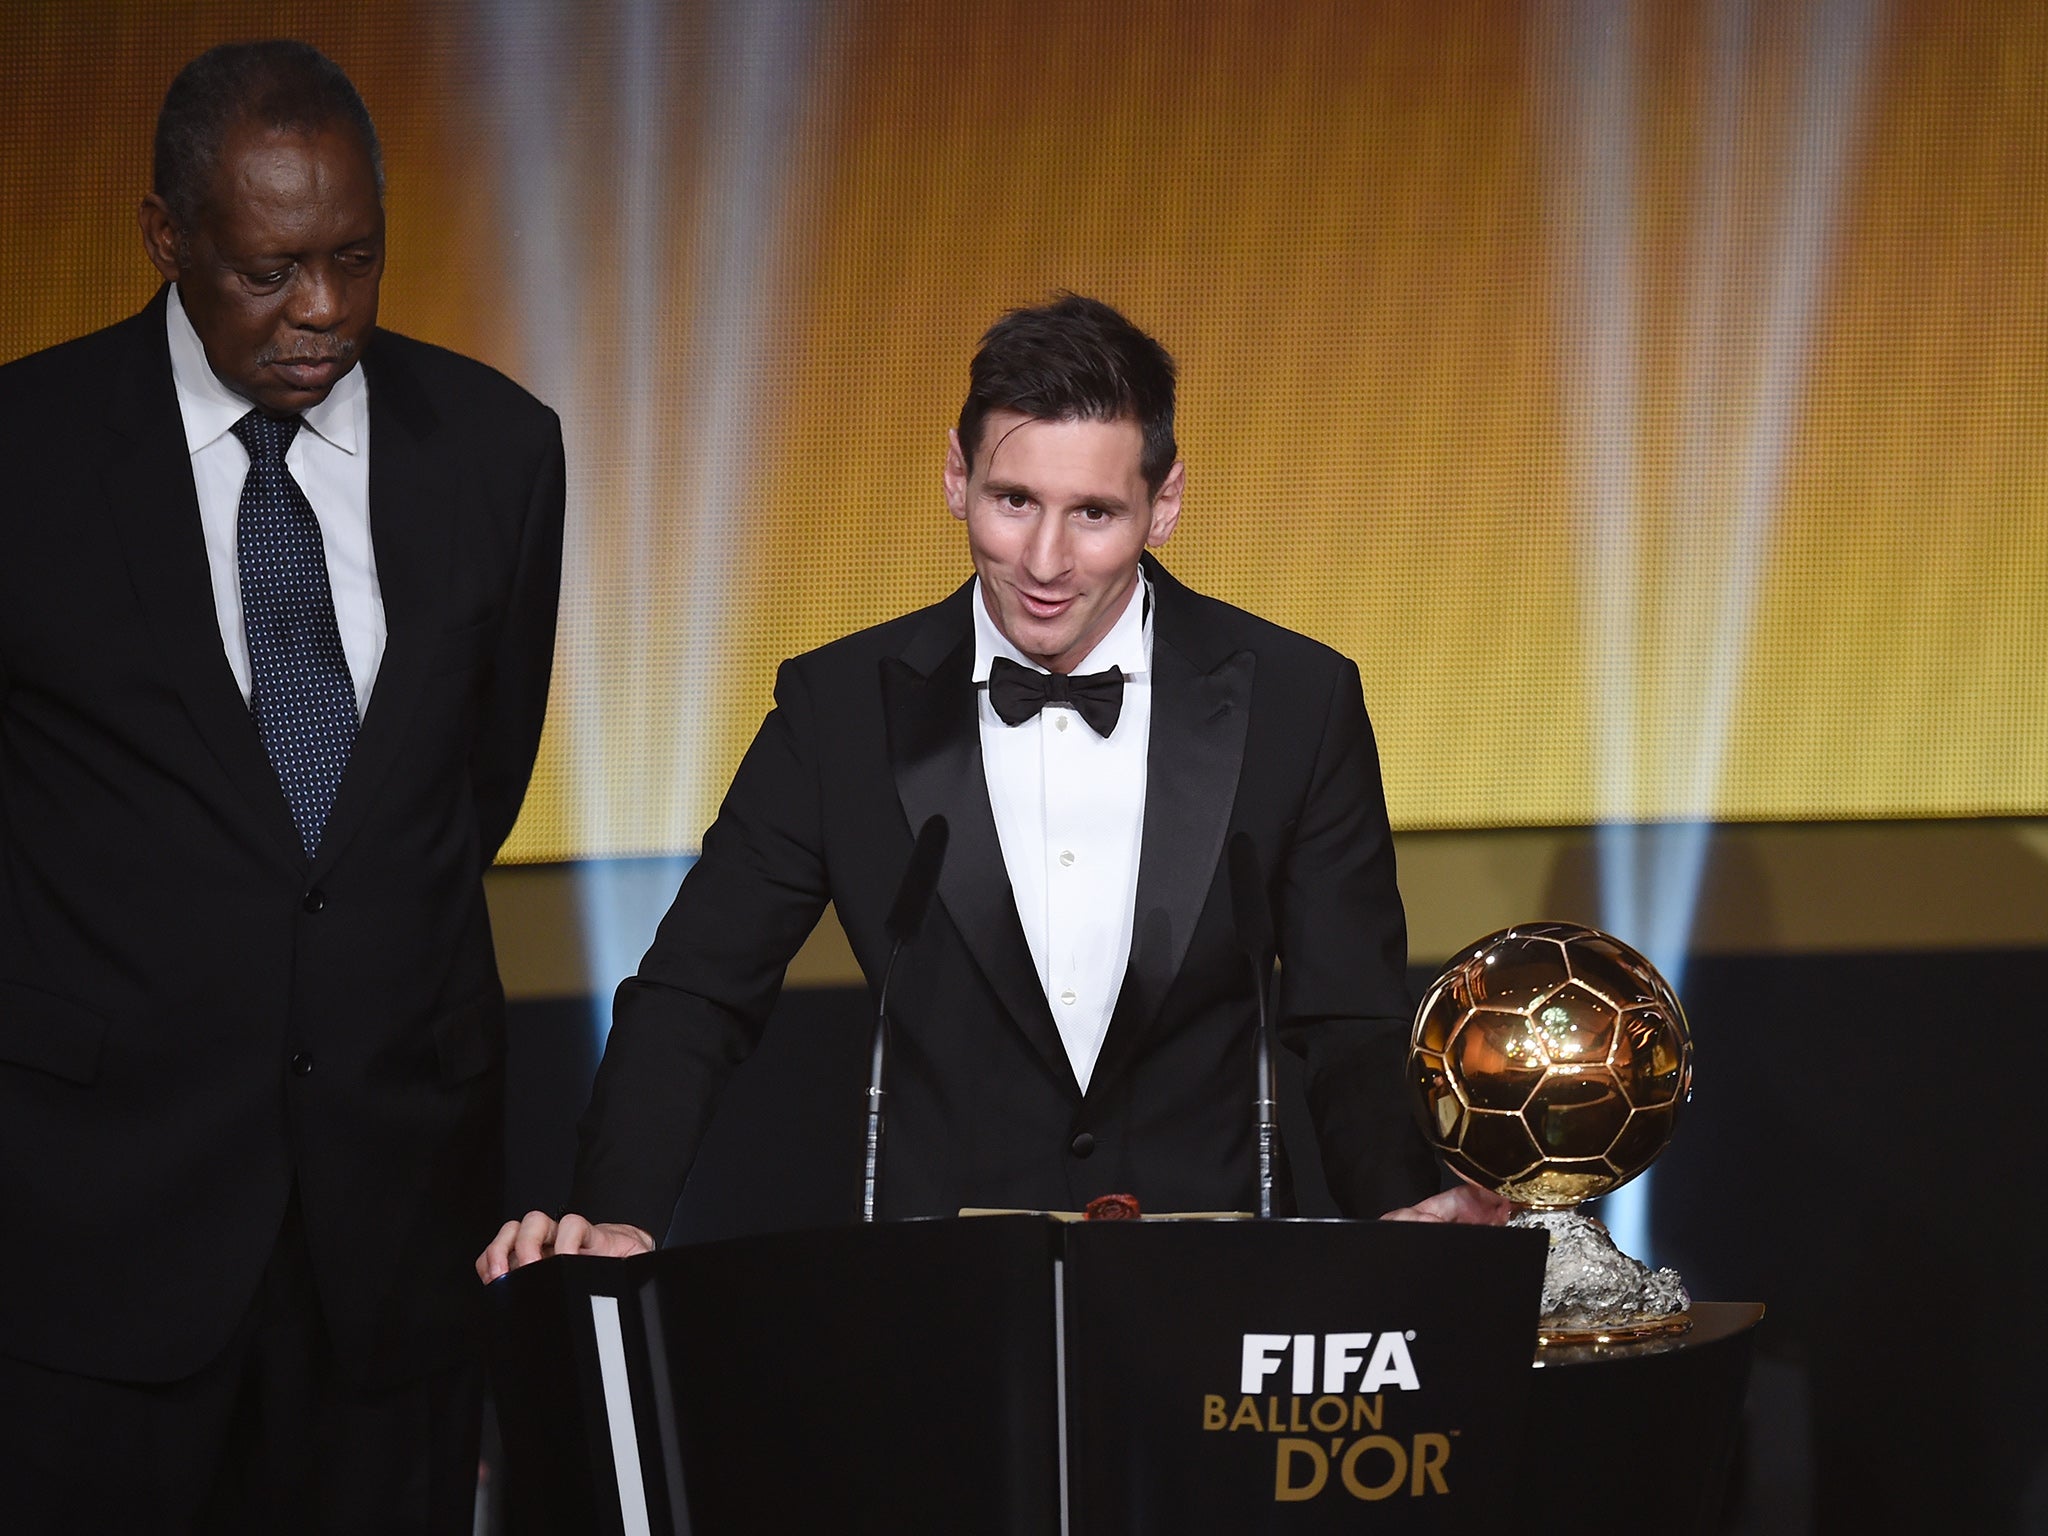 Lionel Messi accepts the Ballon d'Or award